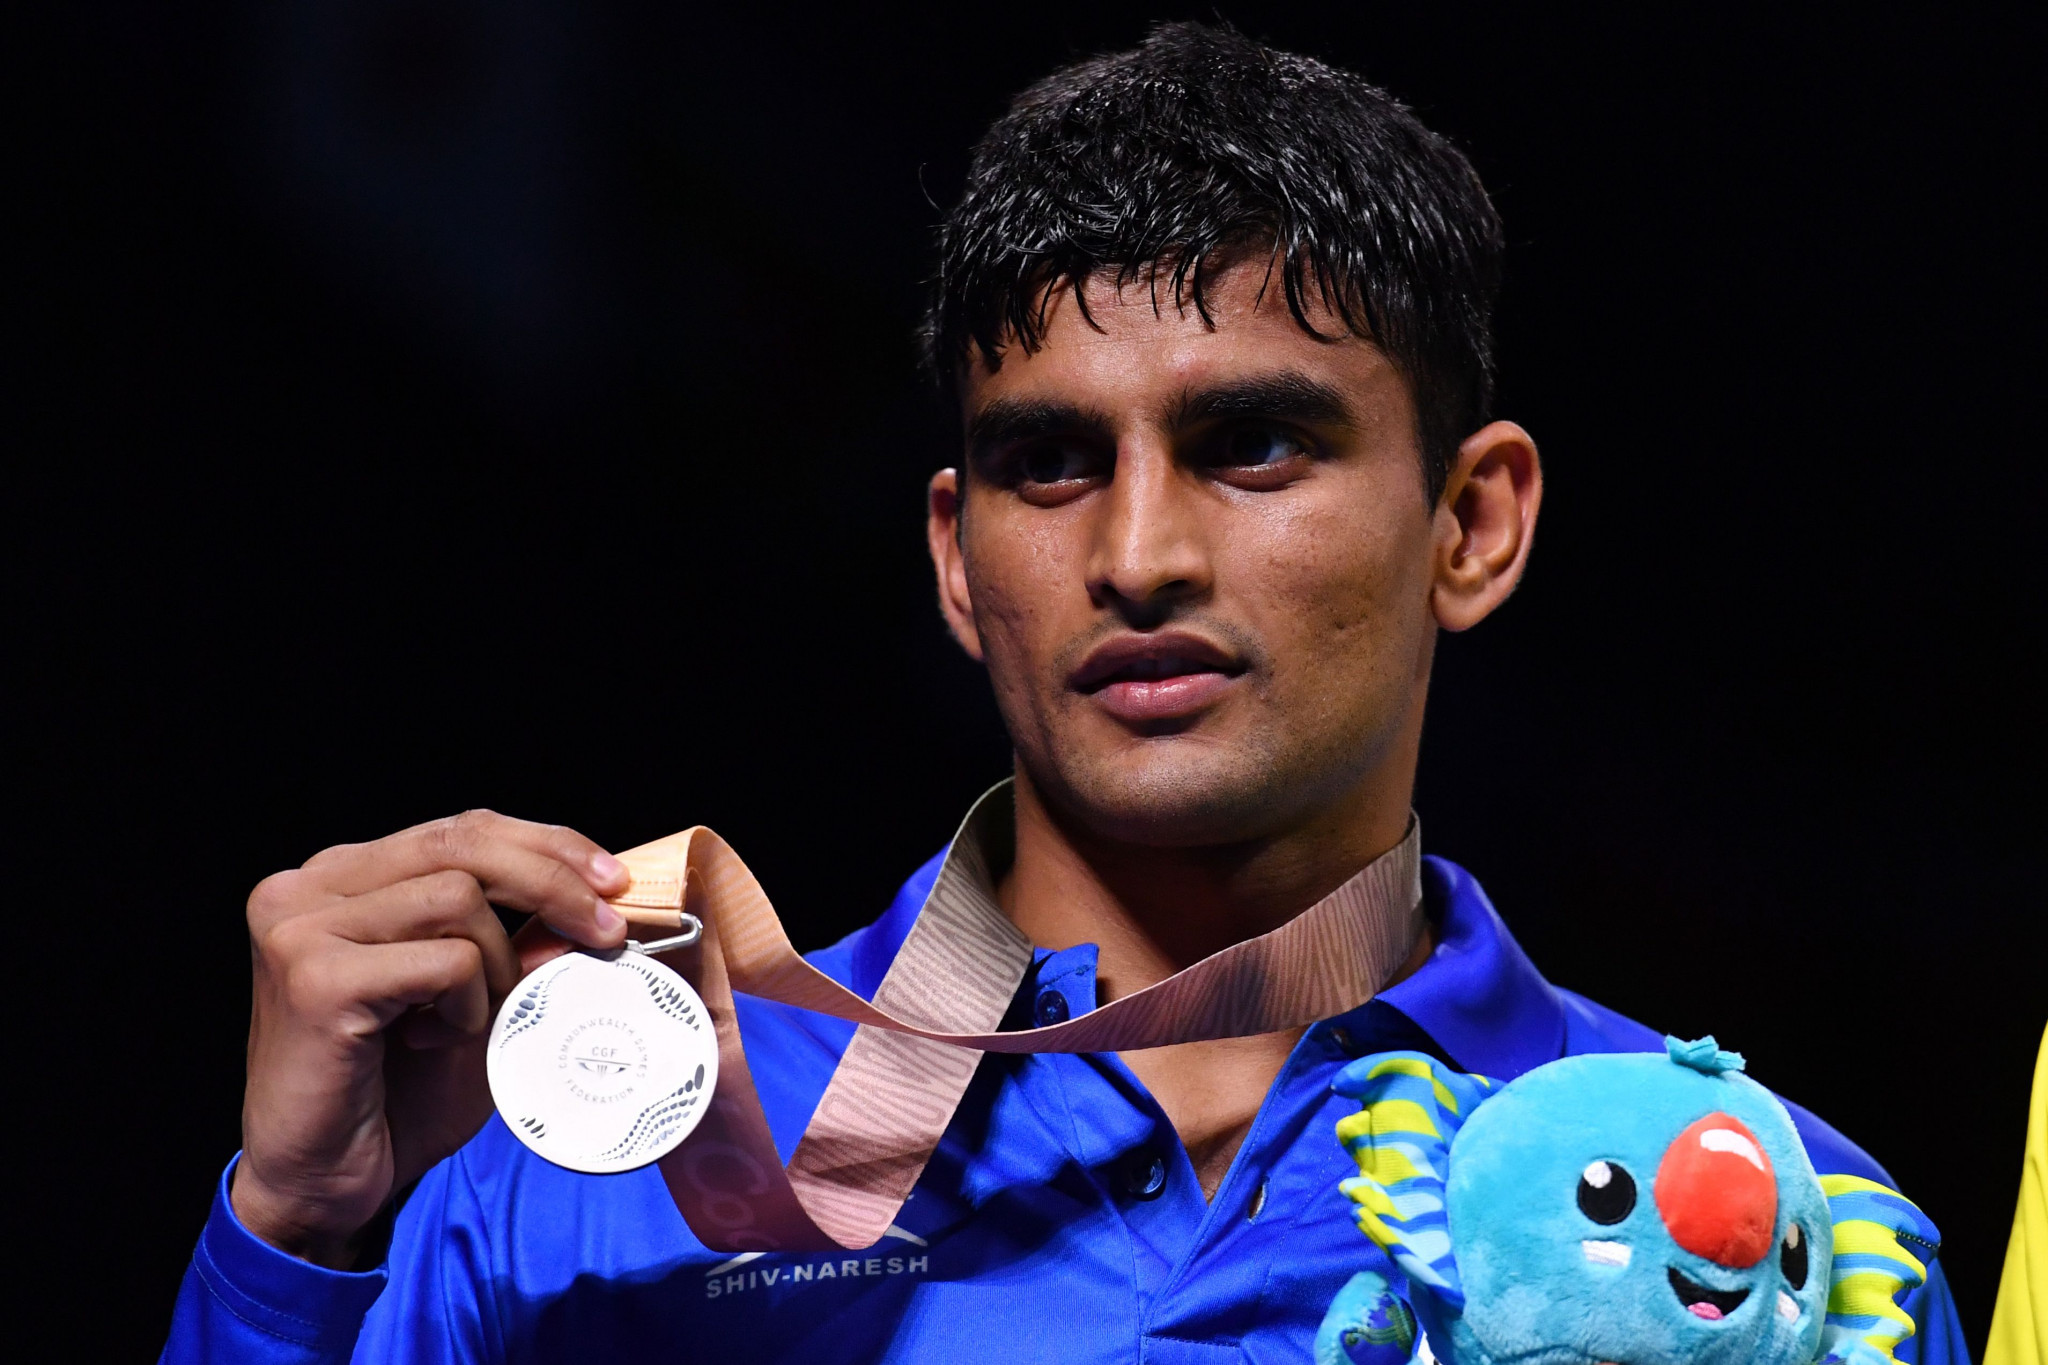 Manish Kaushik earned silver at the 2018 Commonwealth Games in Gold Coast ©Getty Images